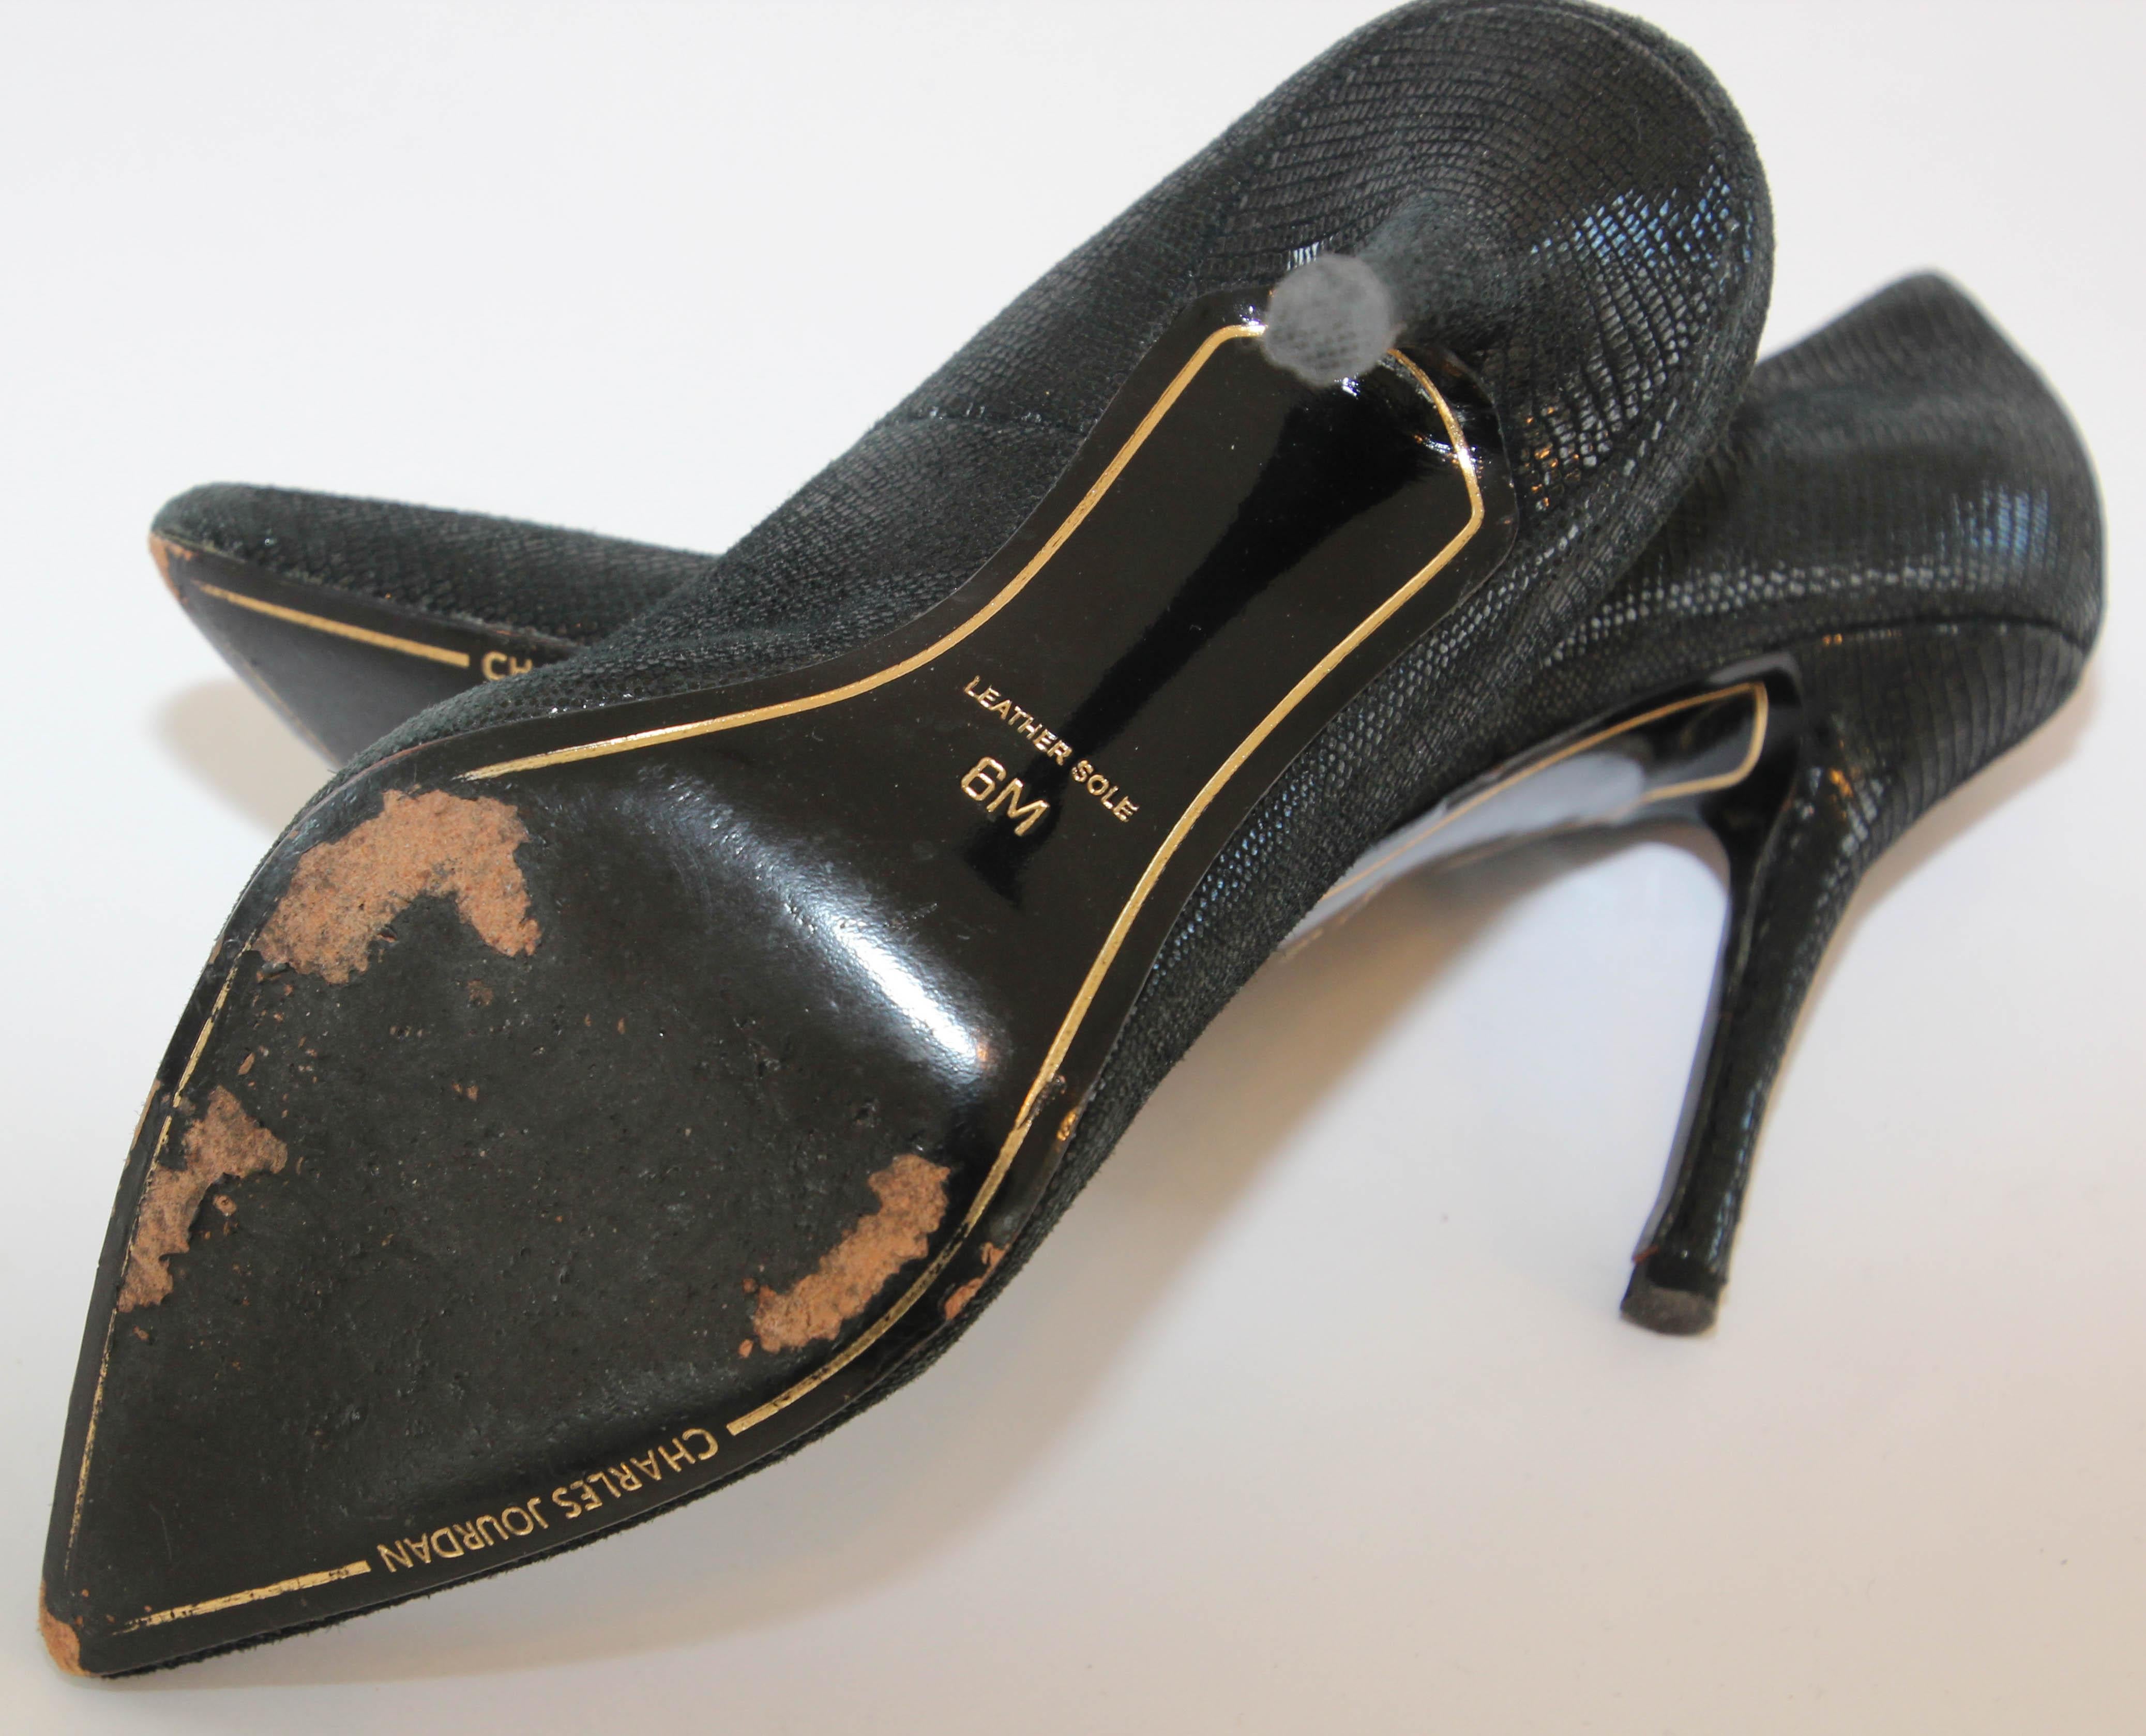 Charles Jourdan Paris Shoes Heels Black Suede 1990s In Good Condition For Sale In North Hollywood, CA